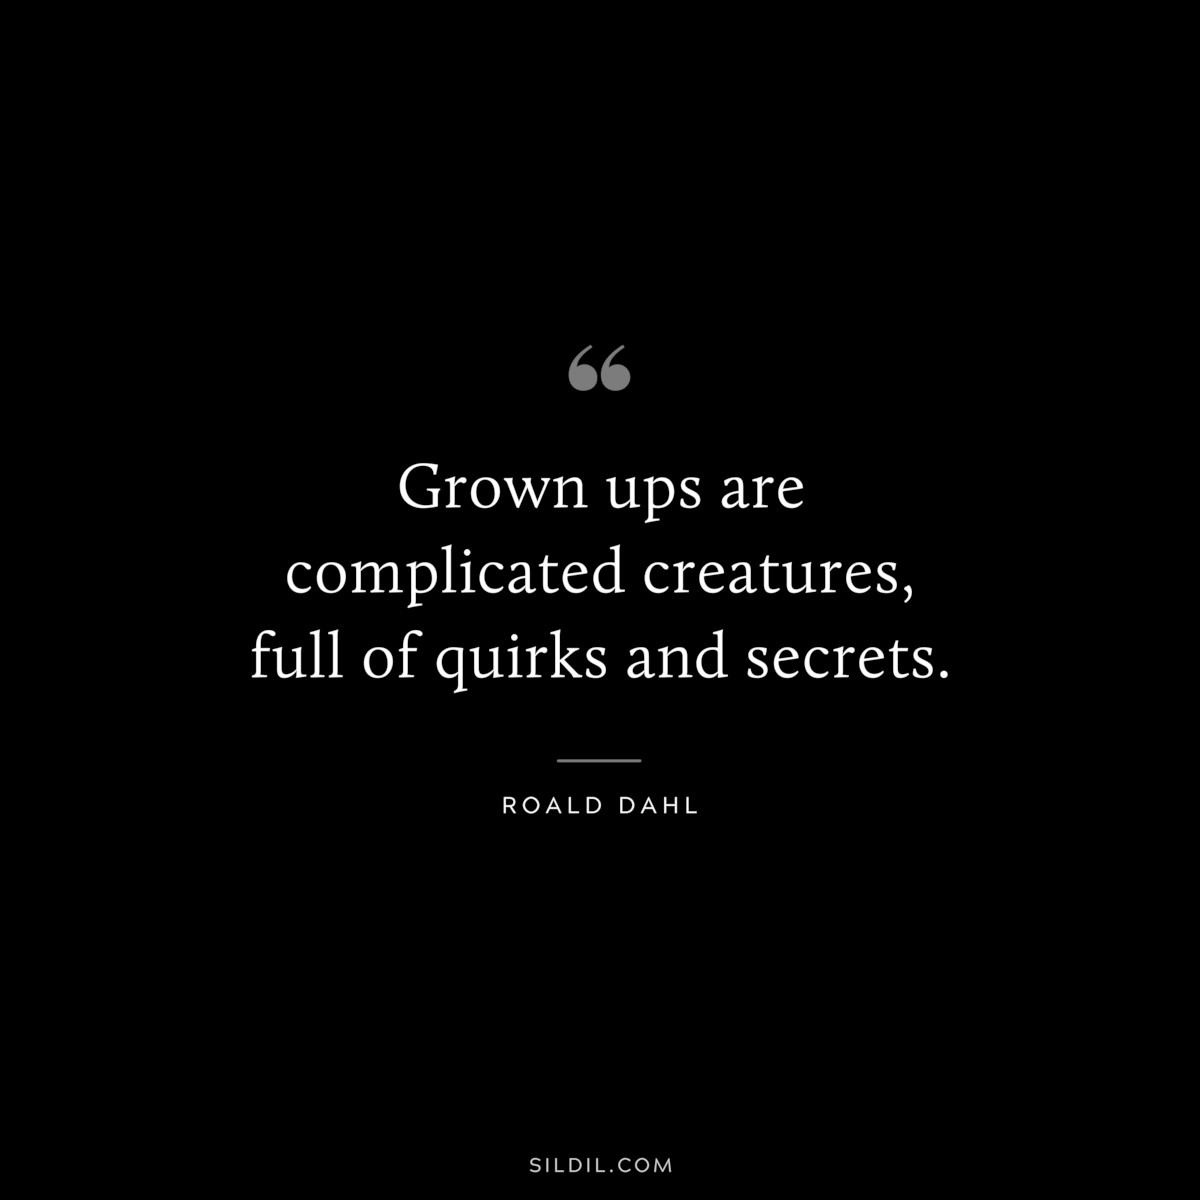 Grown ups are complicated creatures, full of quirks and secrets. ― Roald Dahl